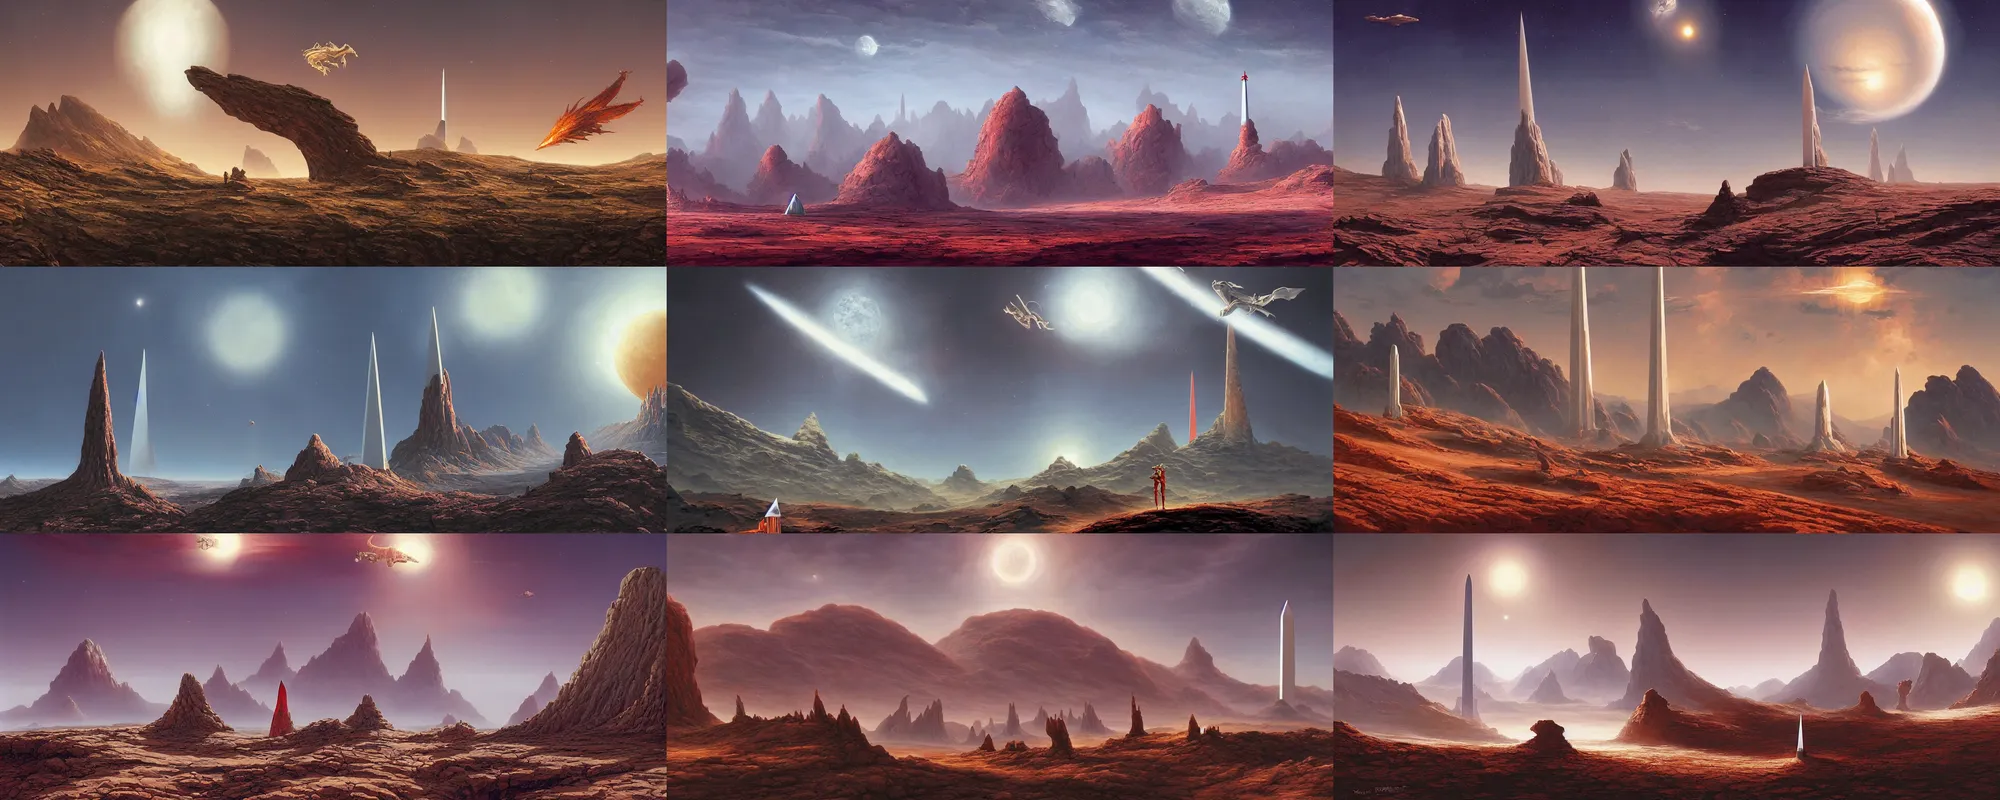 Prompt: red planet landscape with white tall obelisk in the foreground, dragon flying in the background, by ted nasmith, raphael lacoste, don maitz, stephan martiniere, michael whelan